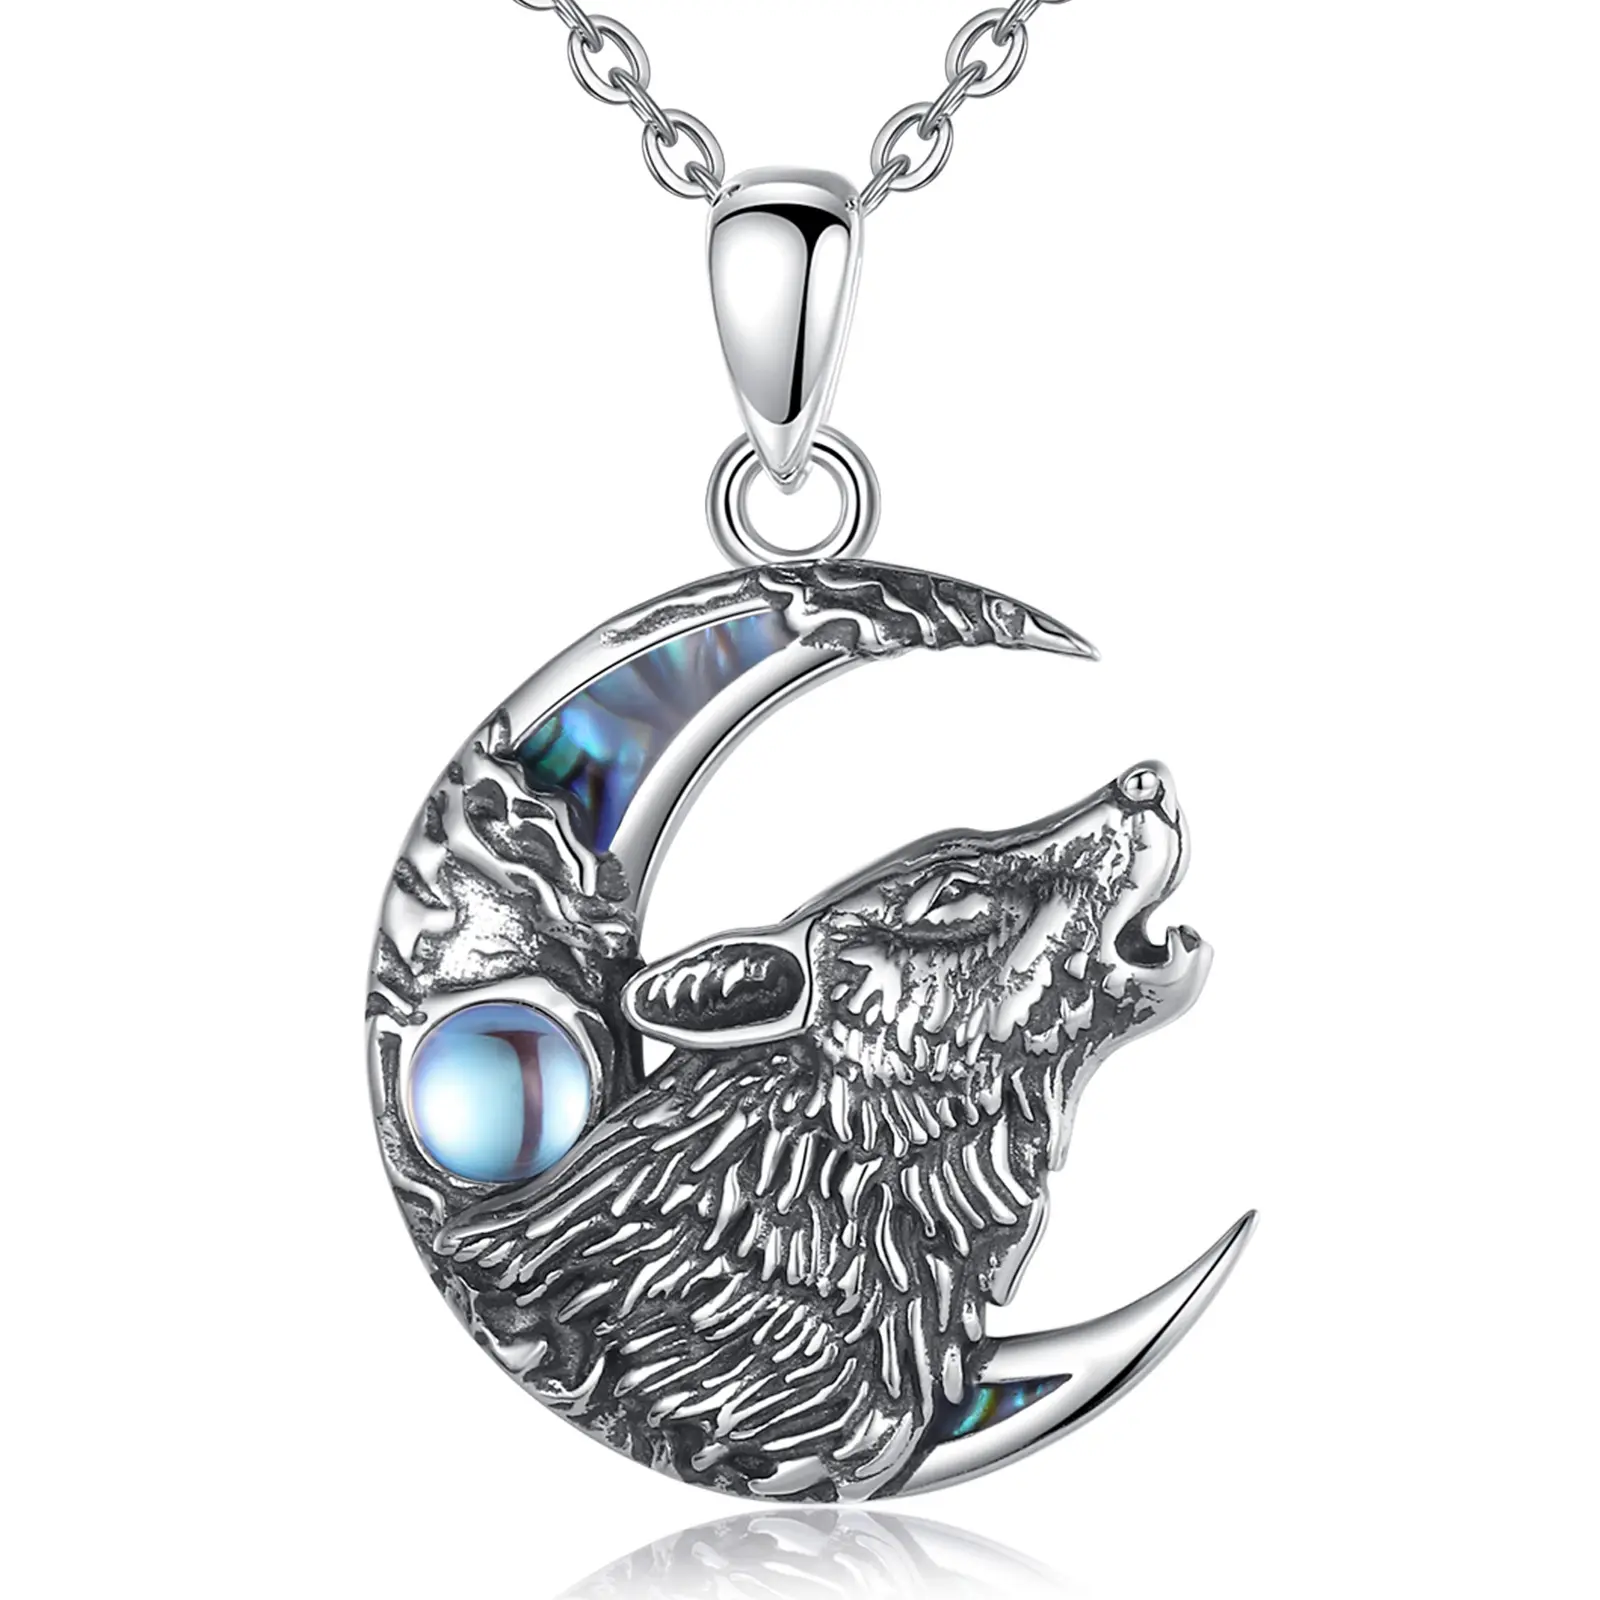 Changda 925 Sterling silver moonstone men viking howling wolf head charm pendant necklace